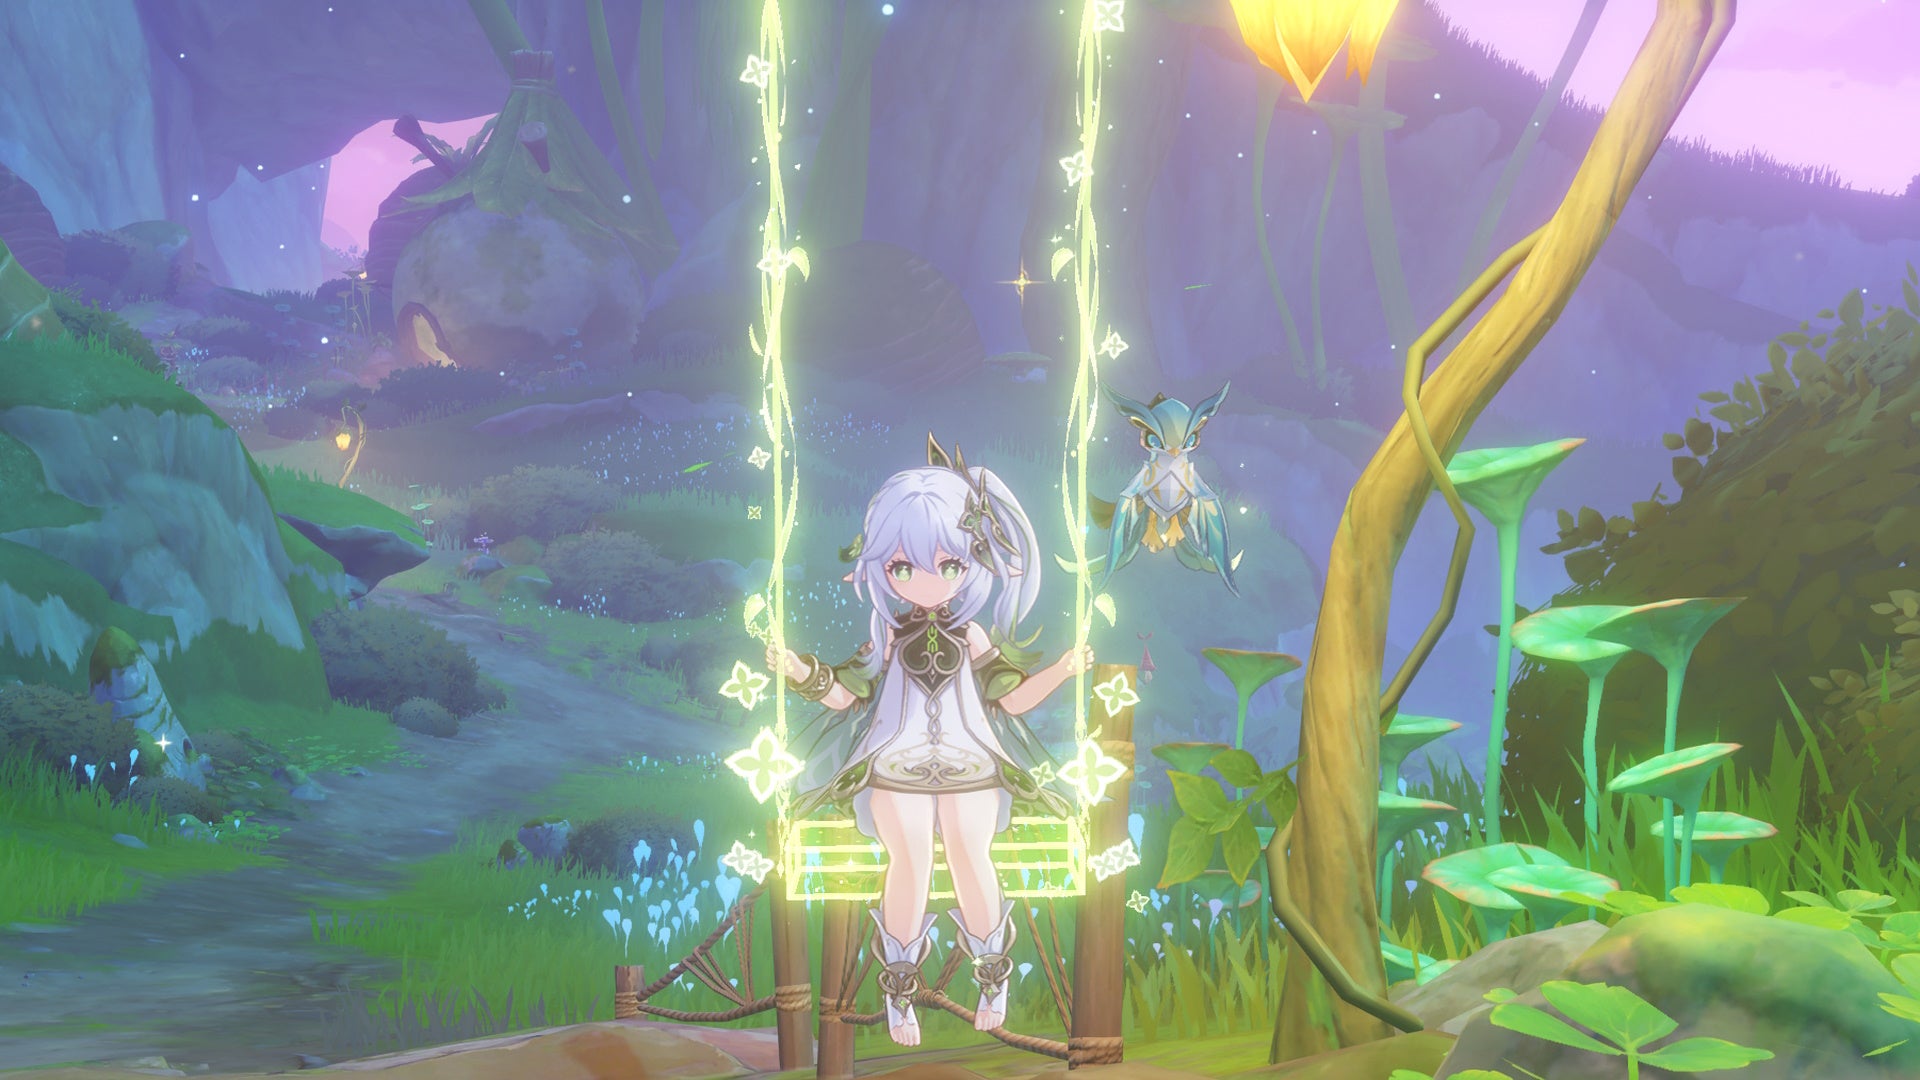 Genshin Impact Nahida materials: A small anime girl wearing a silver dress, trimmed with green, is sitting on a glowing swing made from spectral vines. The sun is setting behind her, and the path is illuminated by a dewdrop-shaped lantern